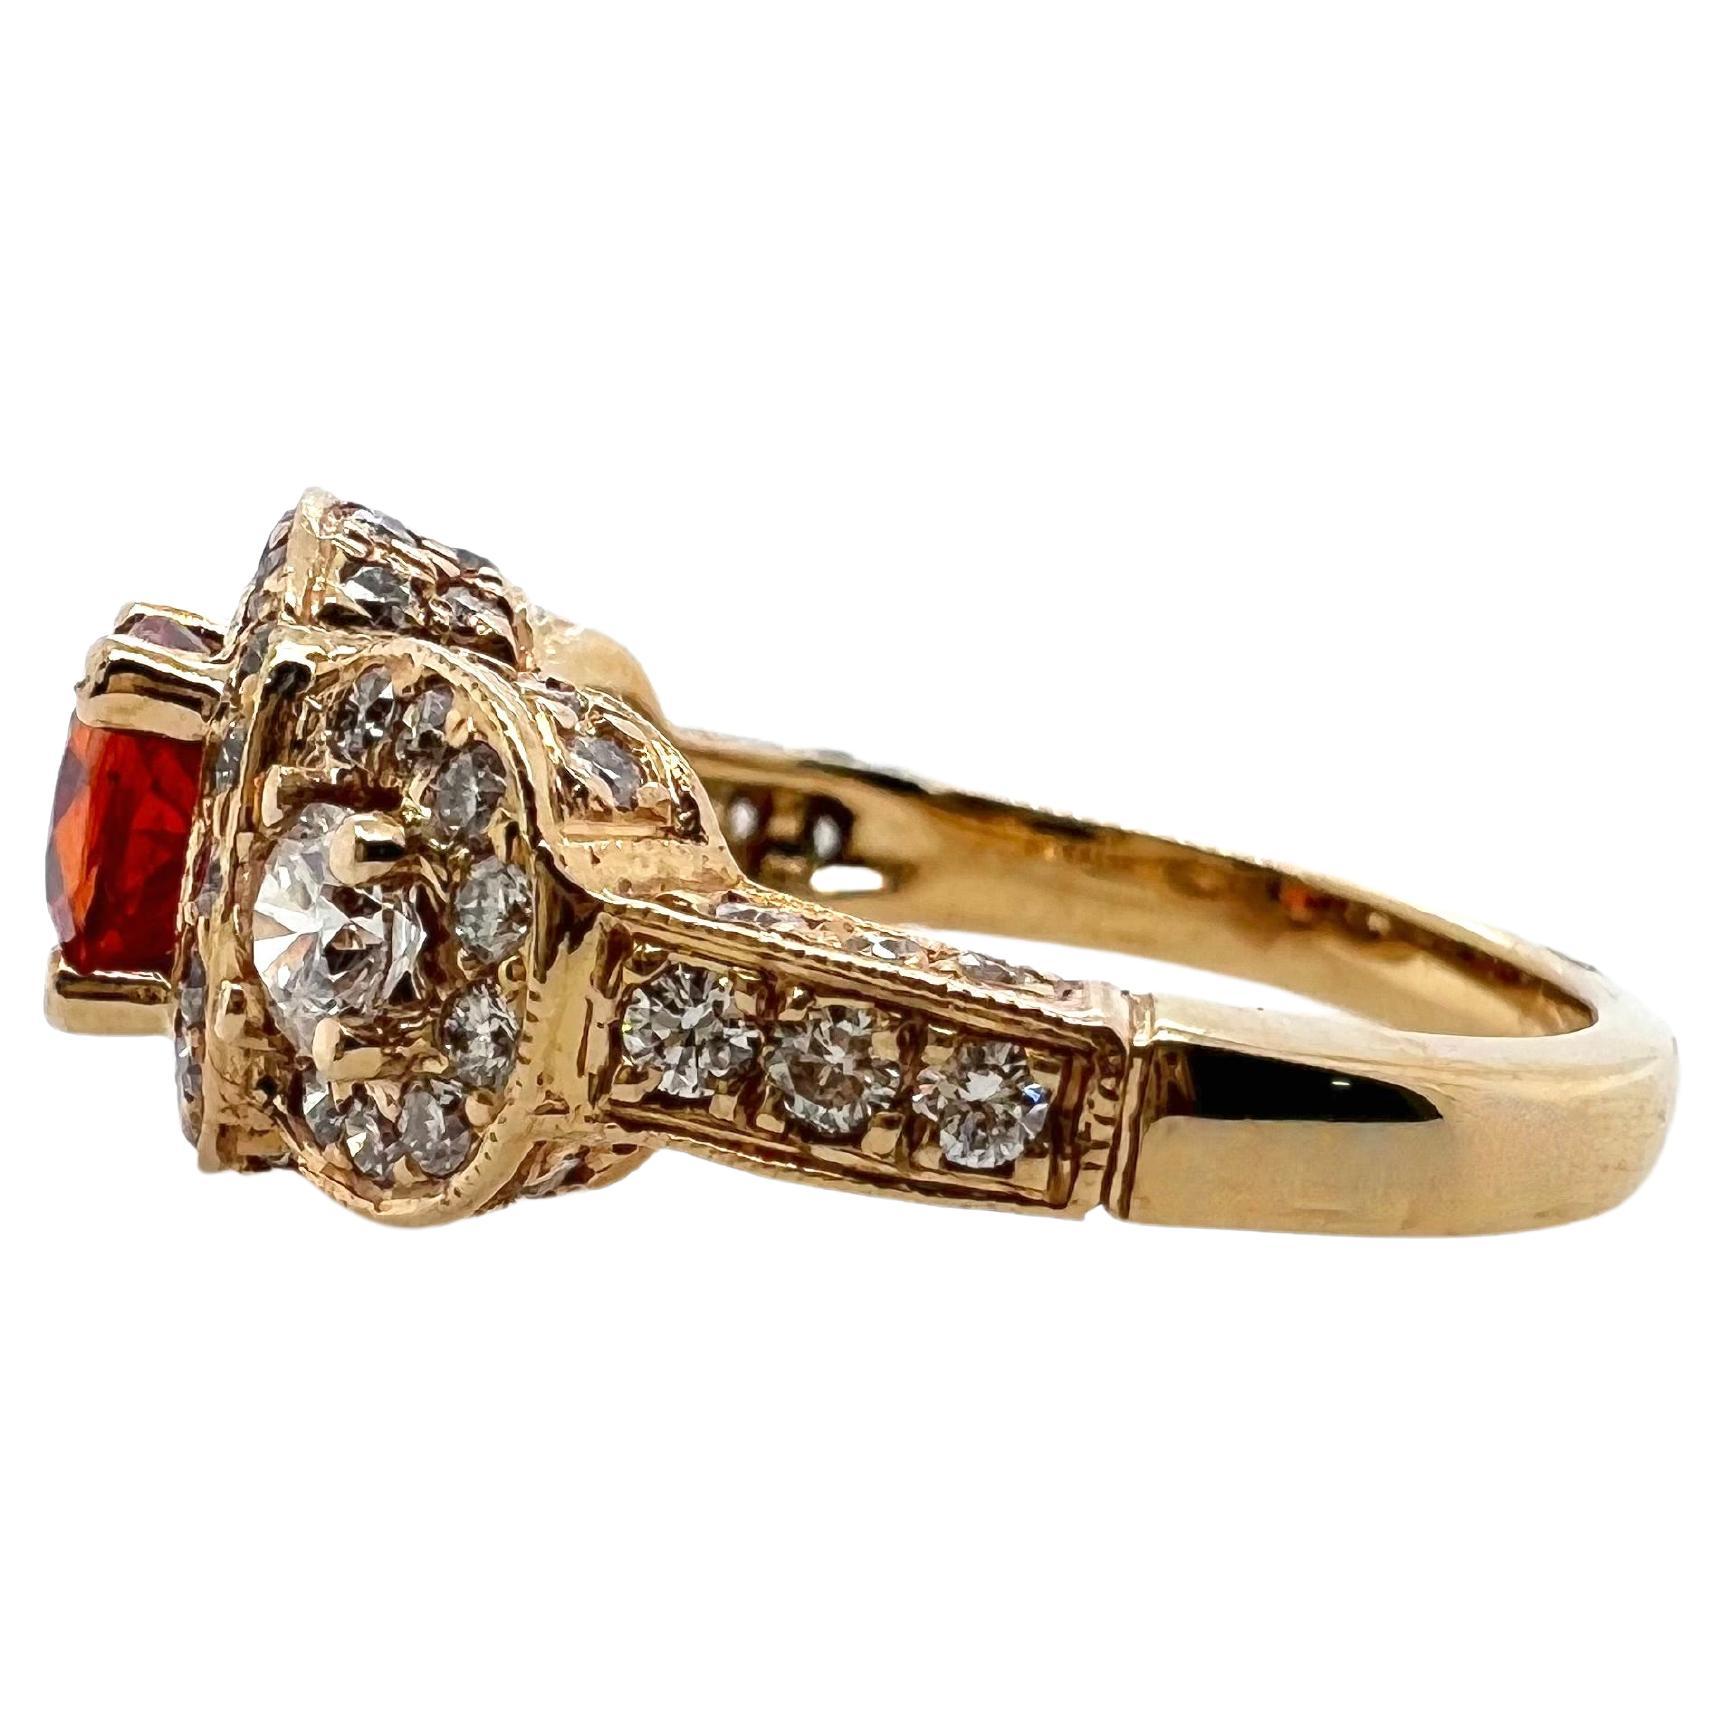  This stunning 3-stone style halo ring with a vibrant orange sapphire will grasp everyone's attention.  The mounting is set with brilliant round diamonds around the top and profile.  The warm orange hue against the yellow gold is soft and easy to